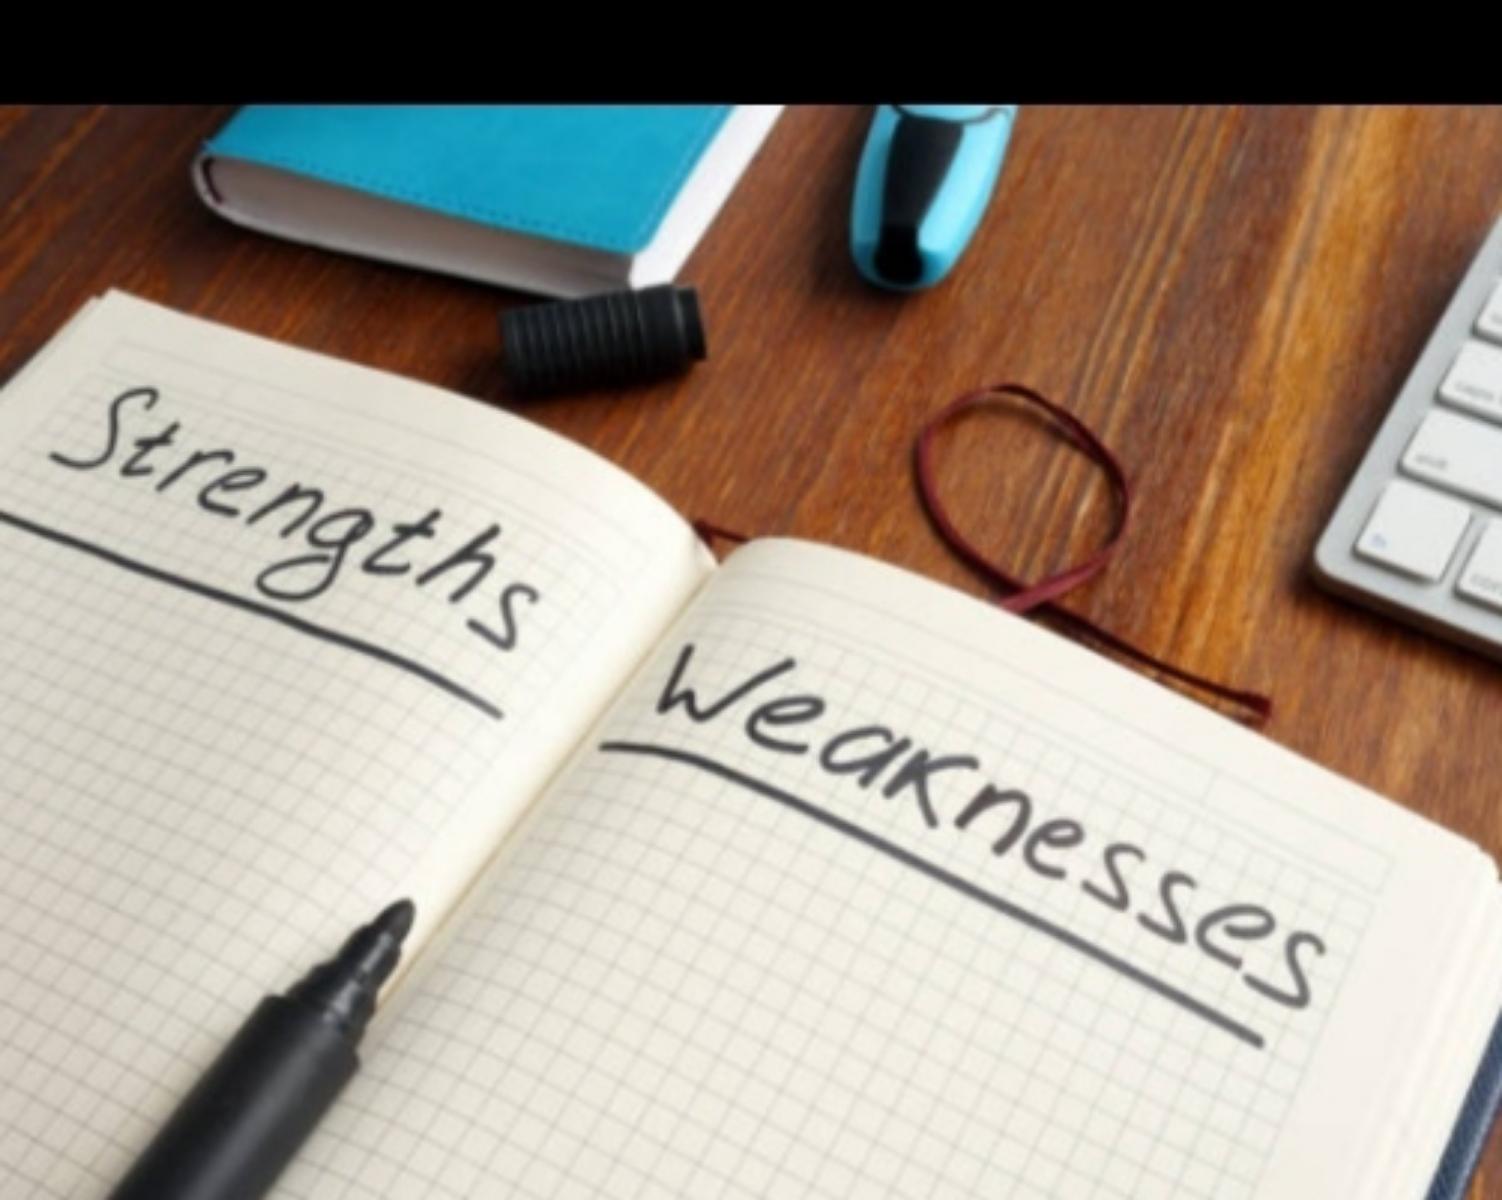 5. See Both Your Strengths And Weaknesses